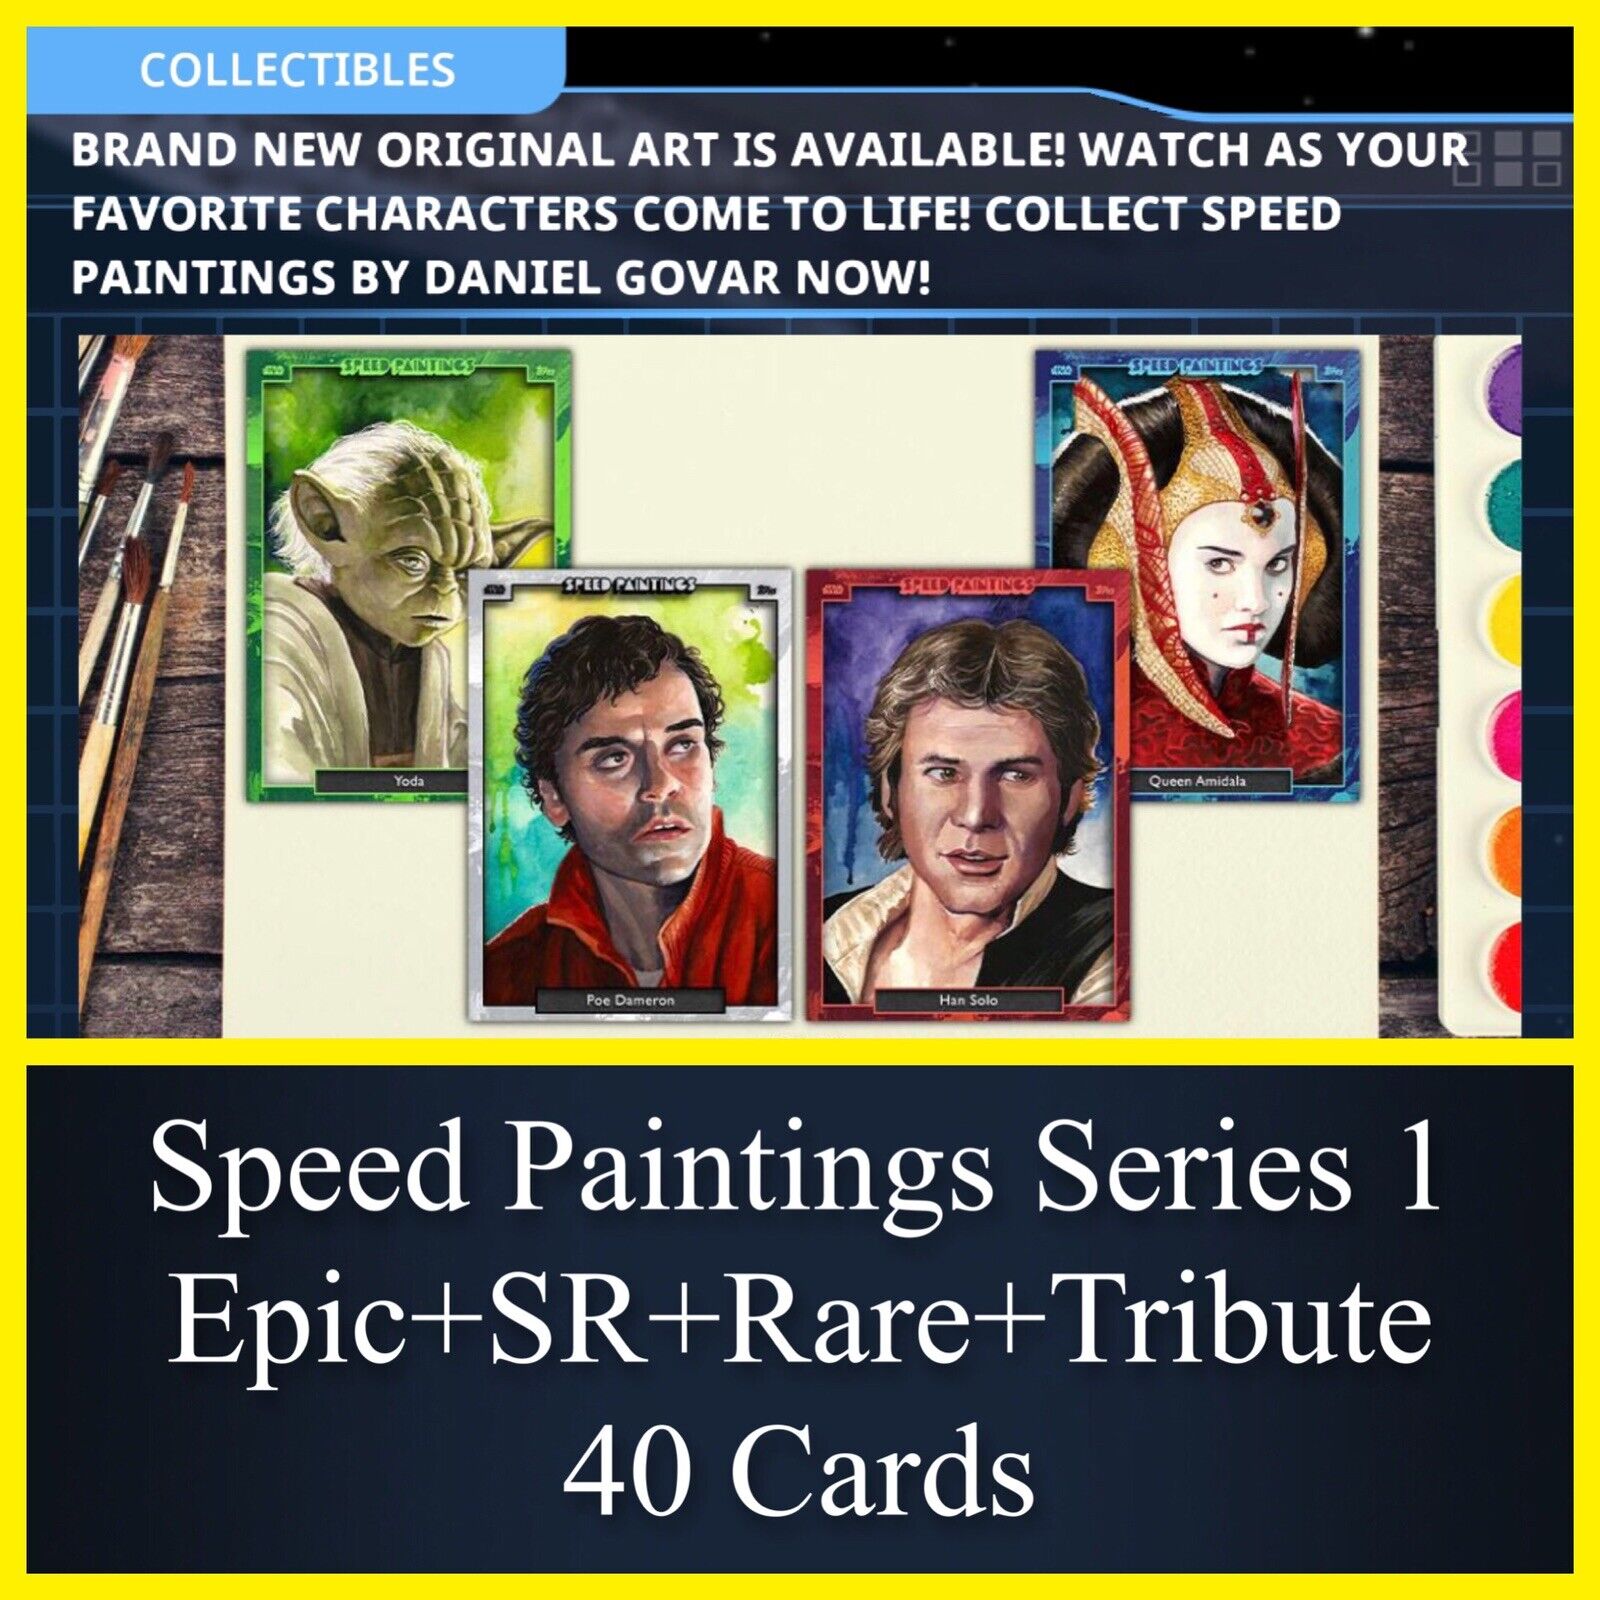 SPEED PAINTINGS SERIES 1-EPIC+SR+RARE+TRIBUTE T6 SET-TOPPS STAR WARS CARD TRADER